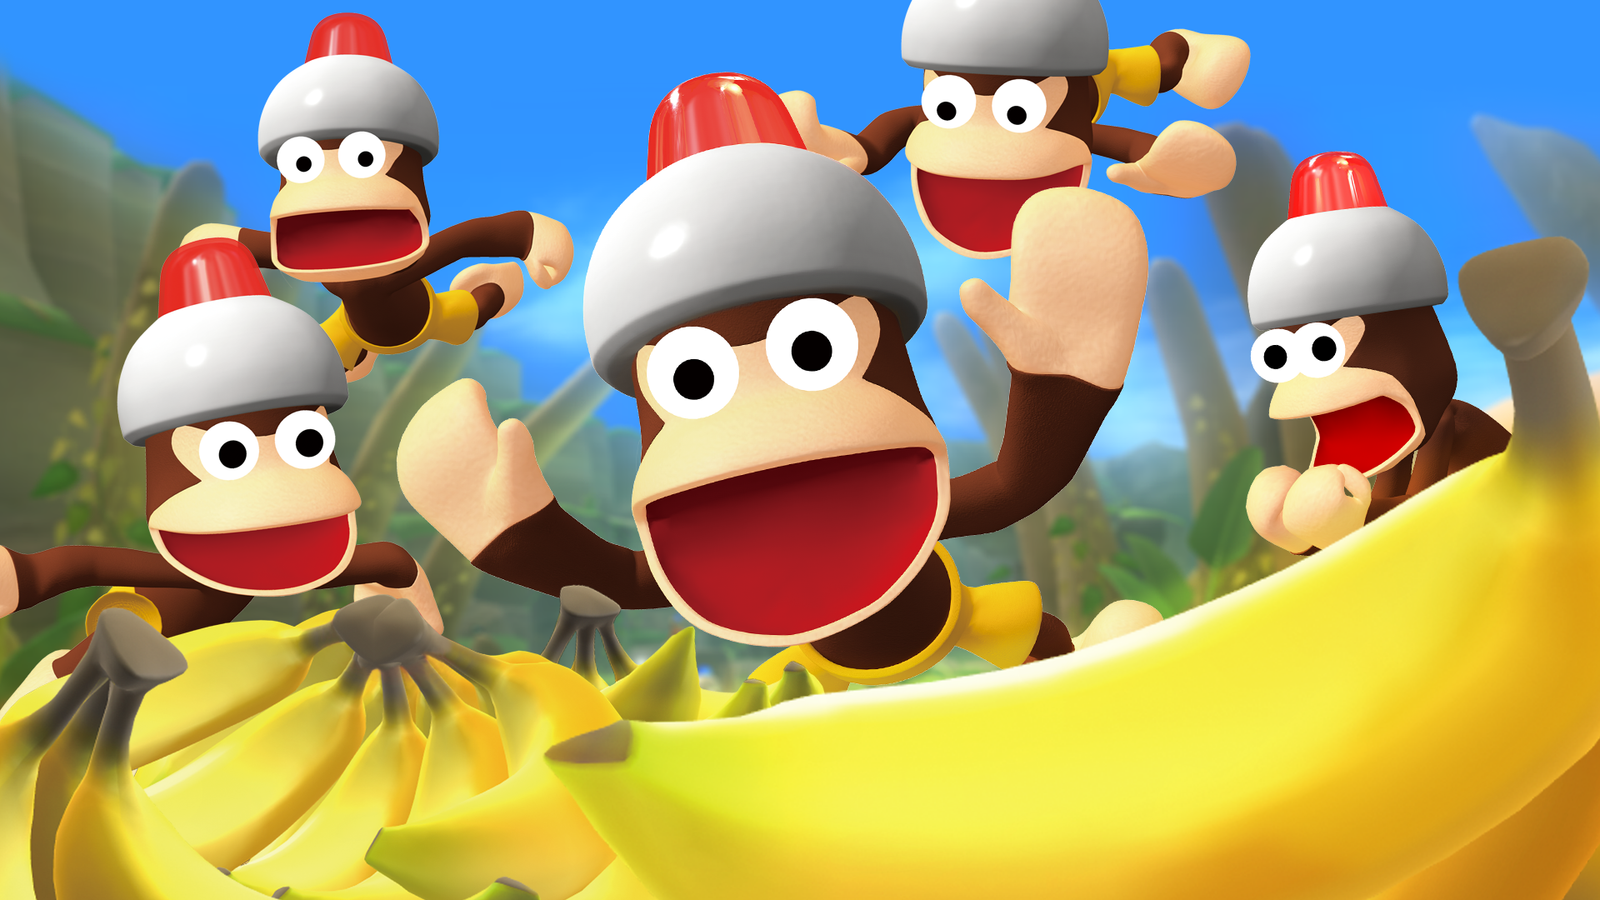 Ape Escape is a game found on PlayStation Plus Premium